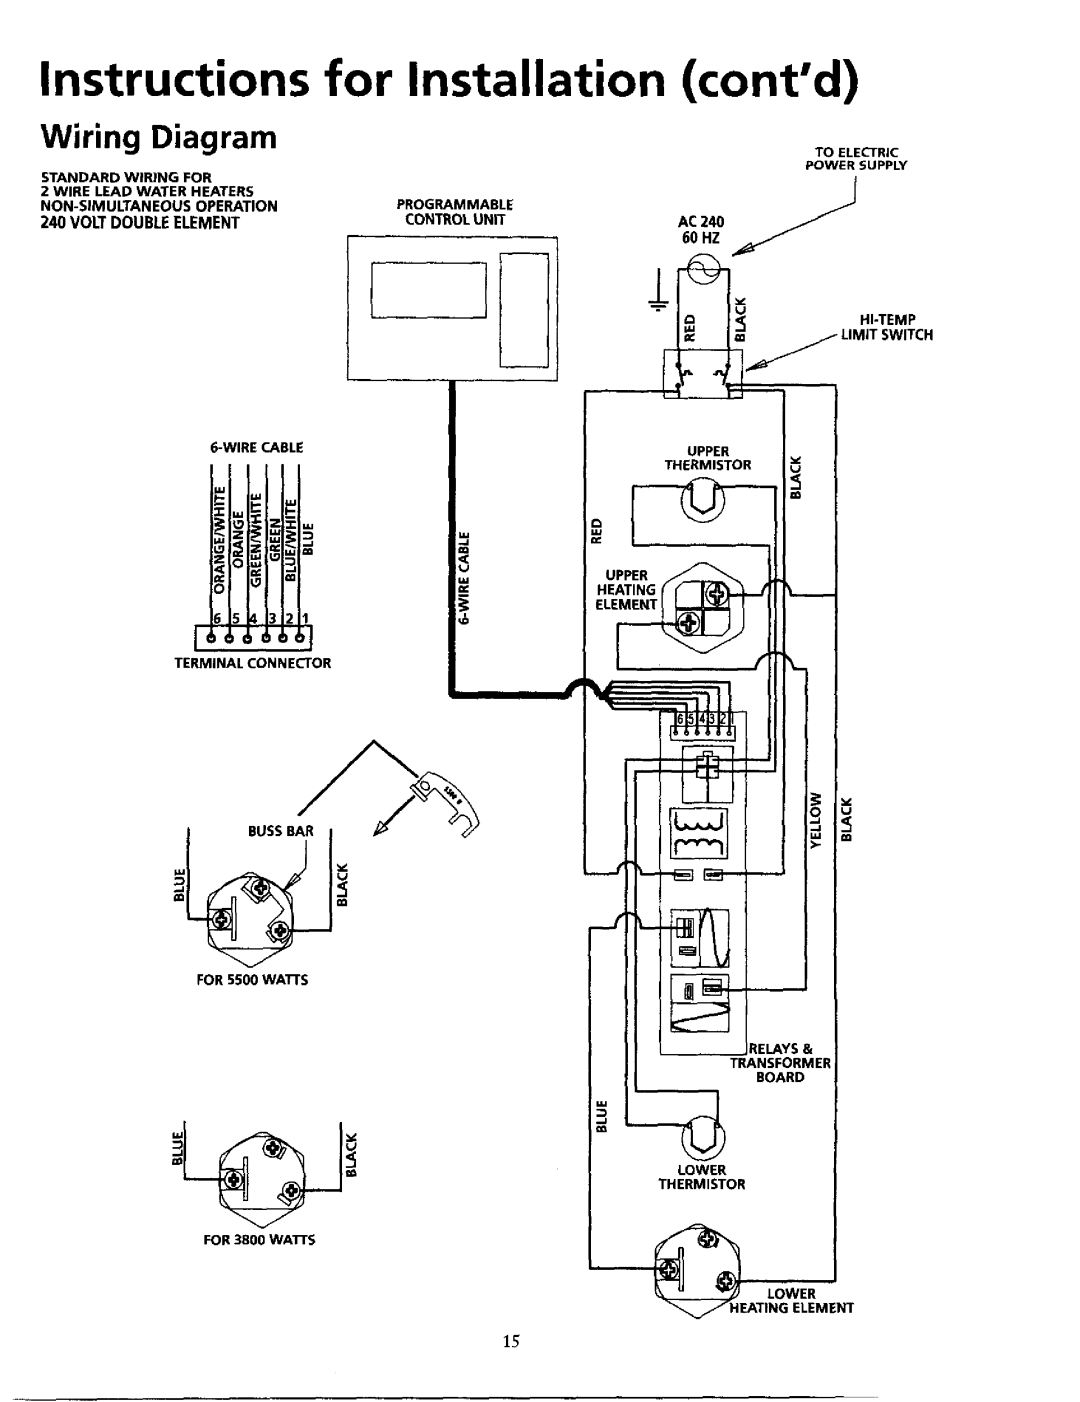 Maytag HE21282PC, HE21250PC operating instructions Wiring Diagram, Instructions for Installation contd, Toelectric 